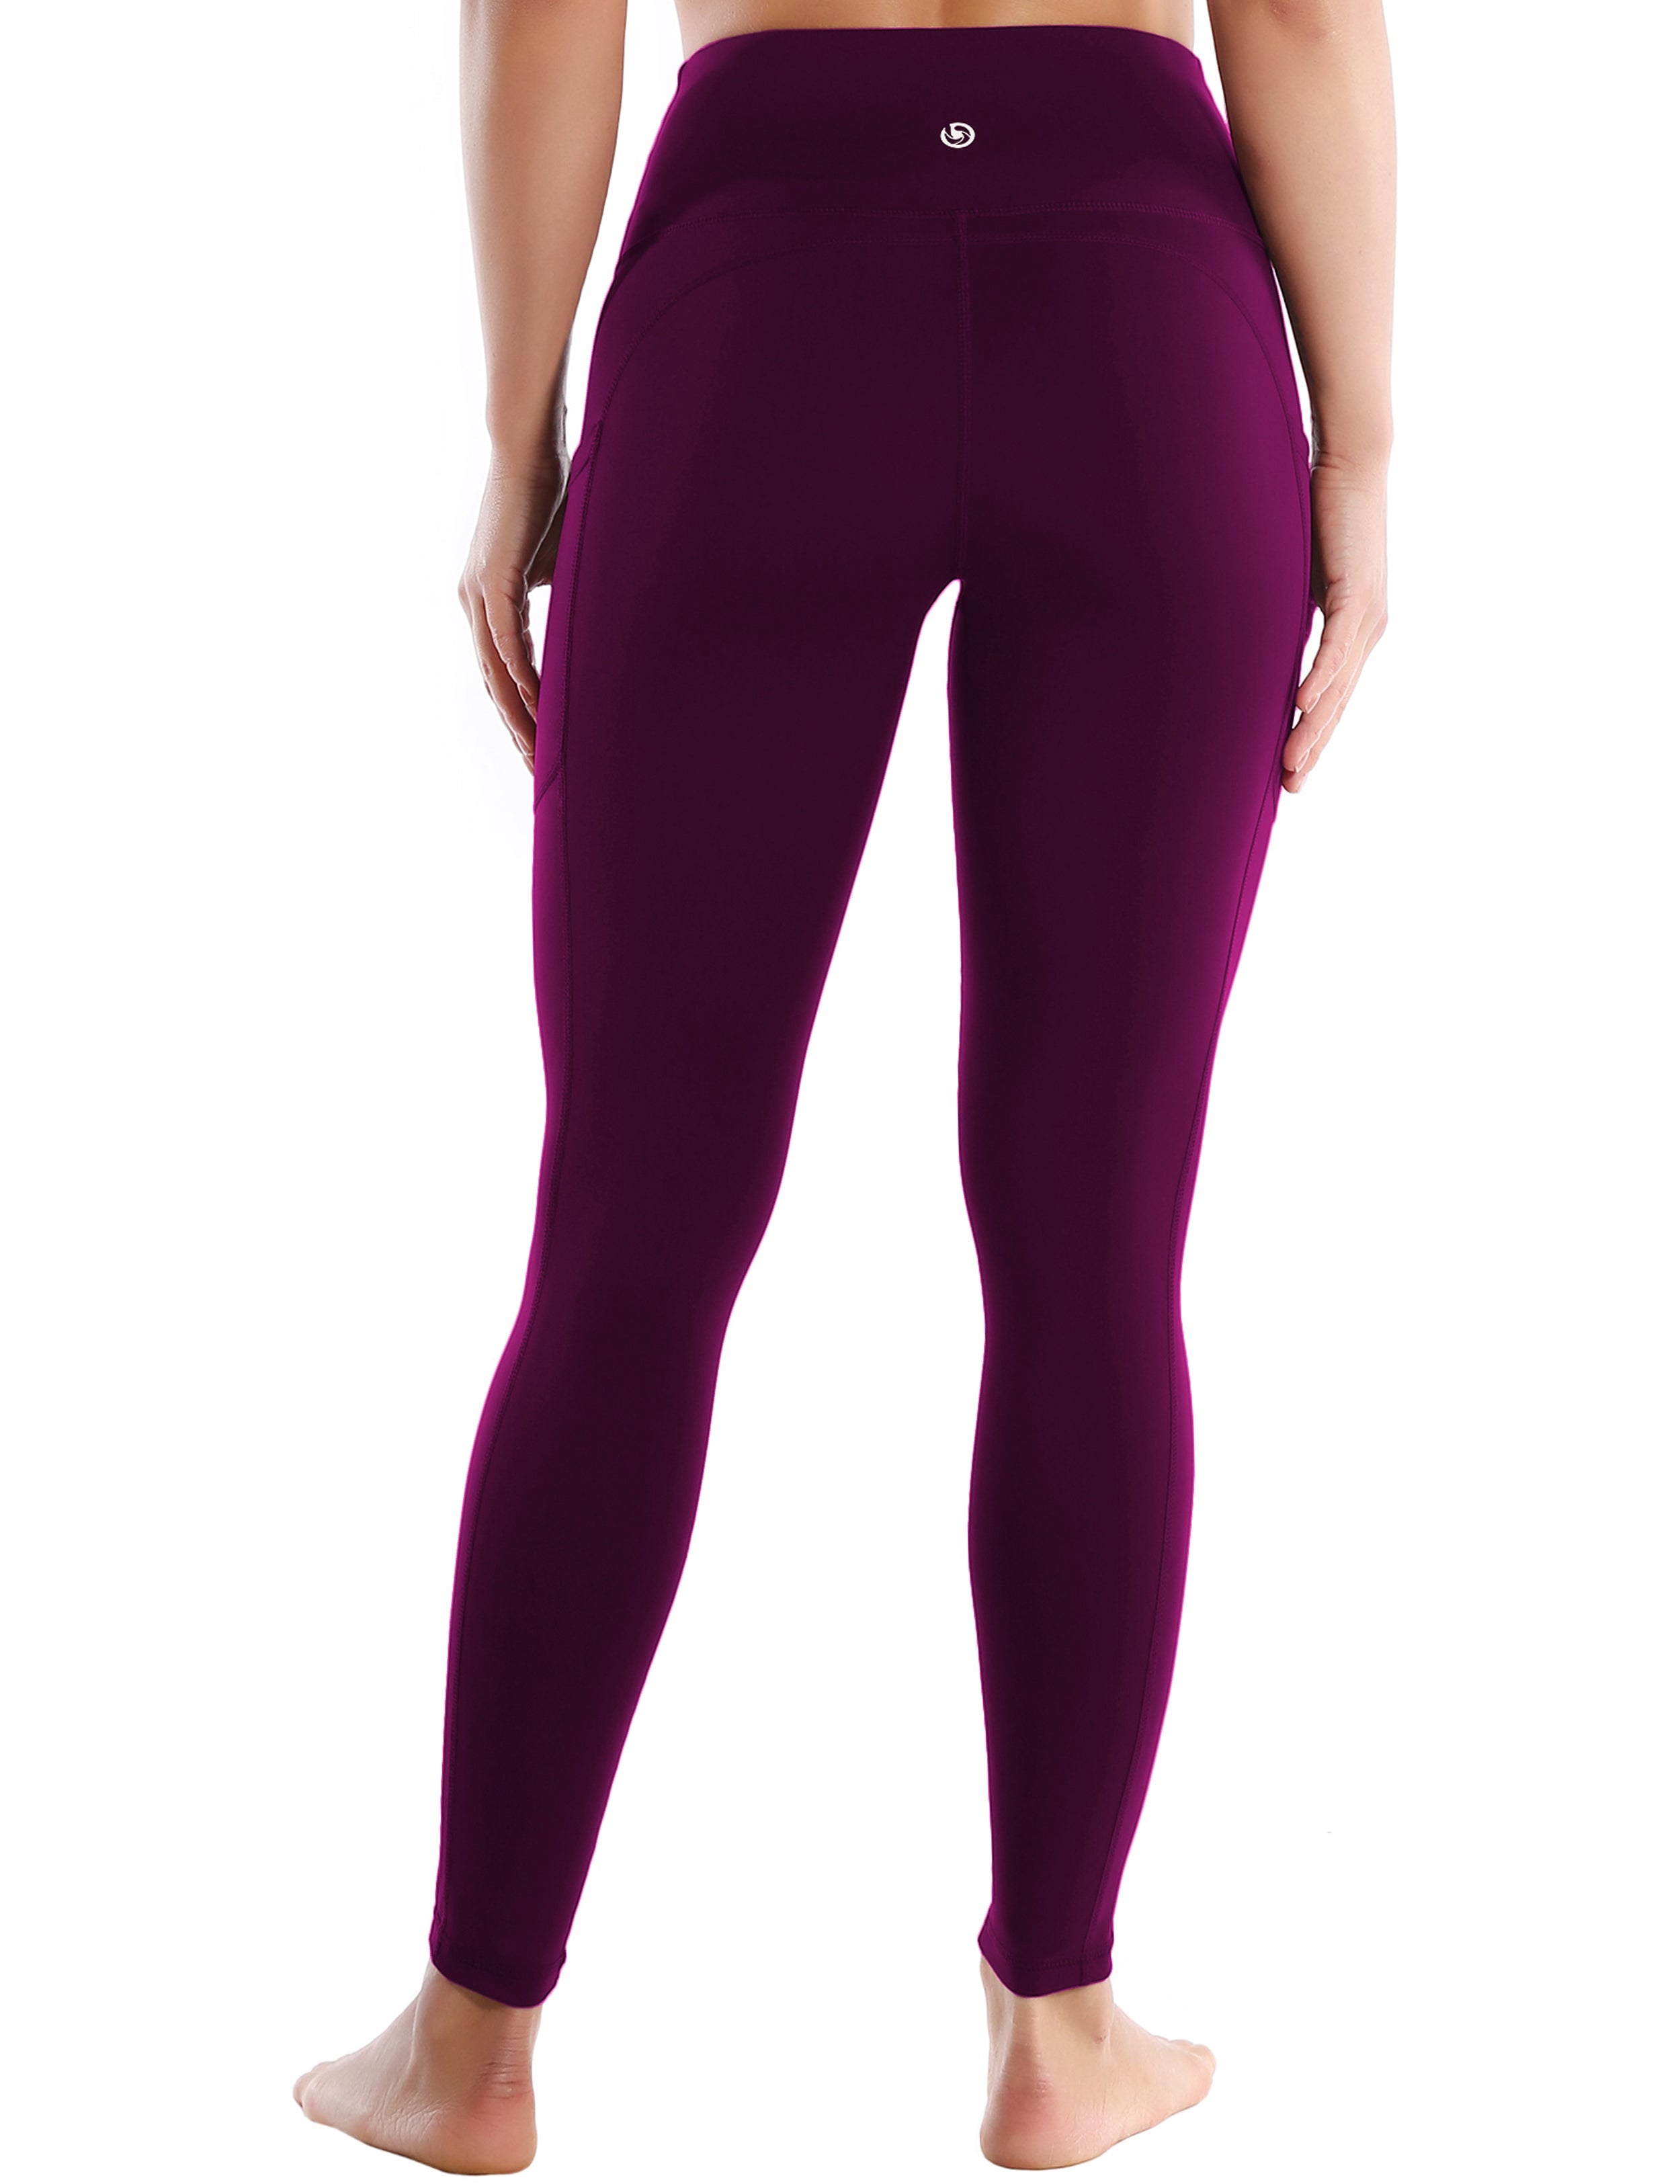 Hip Line Side Pockets Gym Pants plum Sexy Hip Line Side Pockets 75%Nylon/25%Spandex Fabric doesn't attract lint easily 4-way stretch No see-through Moisture-wicking Tummy control Inner pocket Two lengths